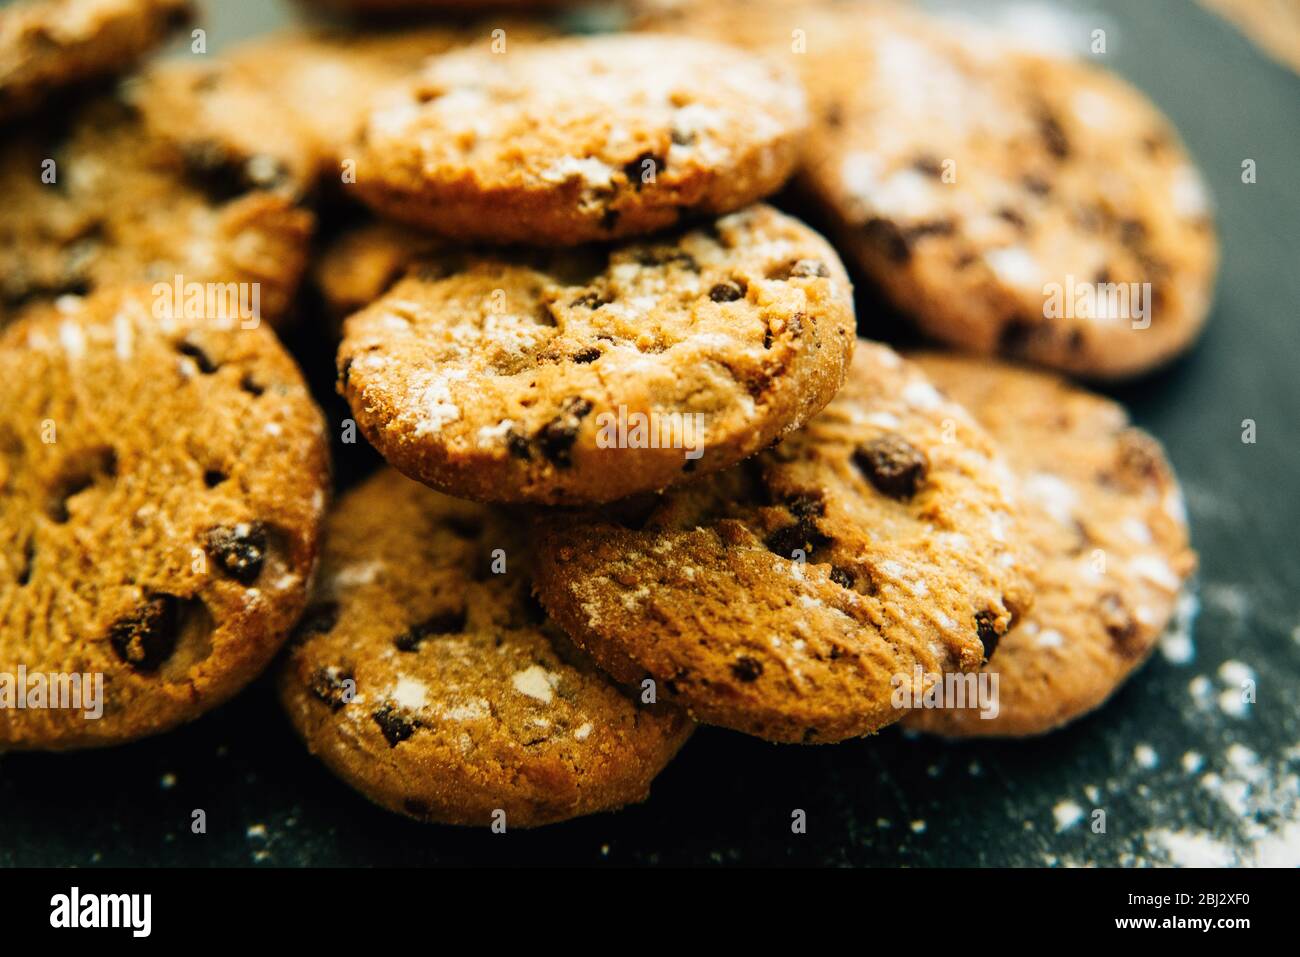 Close up of homemade chocolate chip cookies/biscuits sprinkled with flour on slate Stock Photo